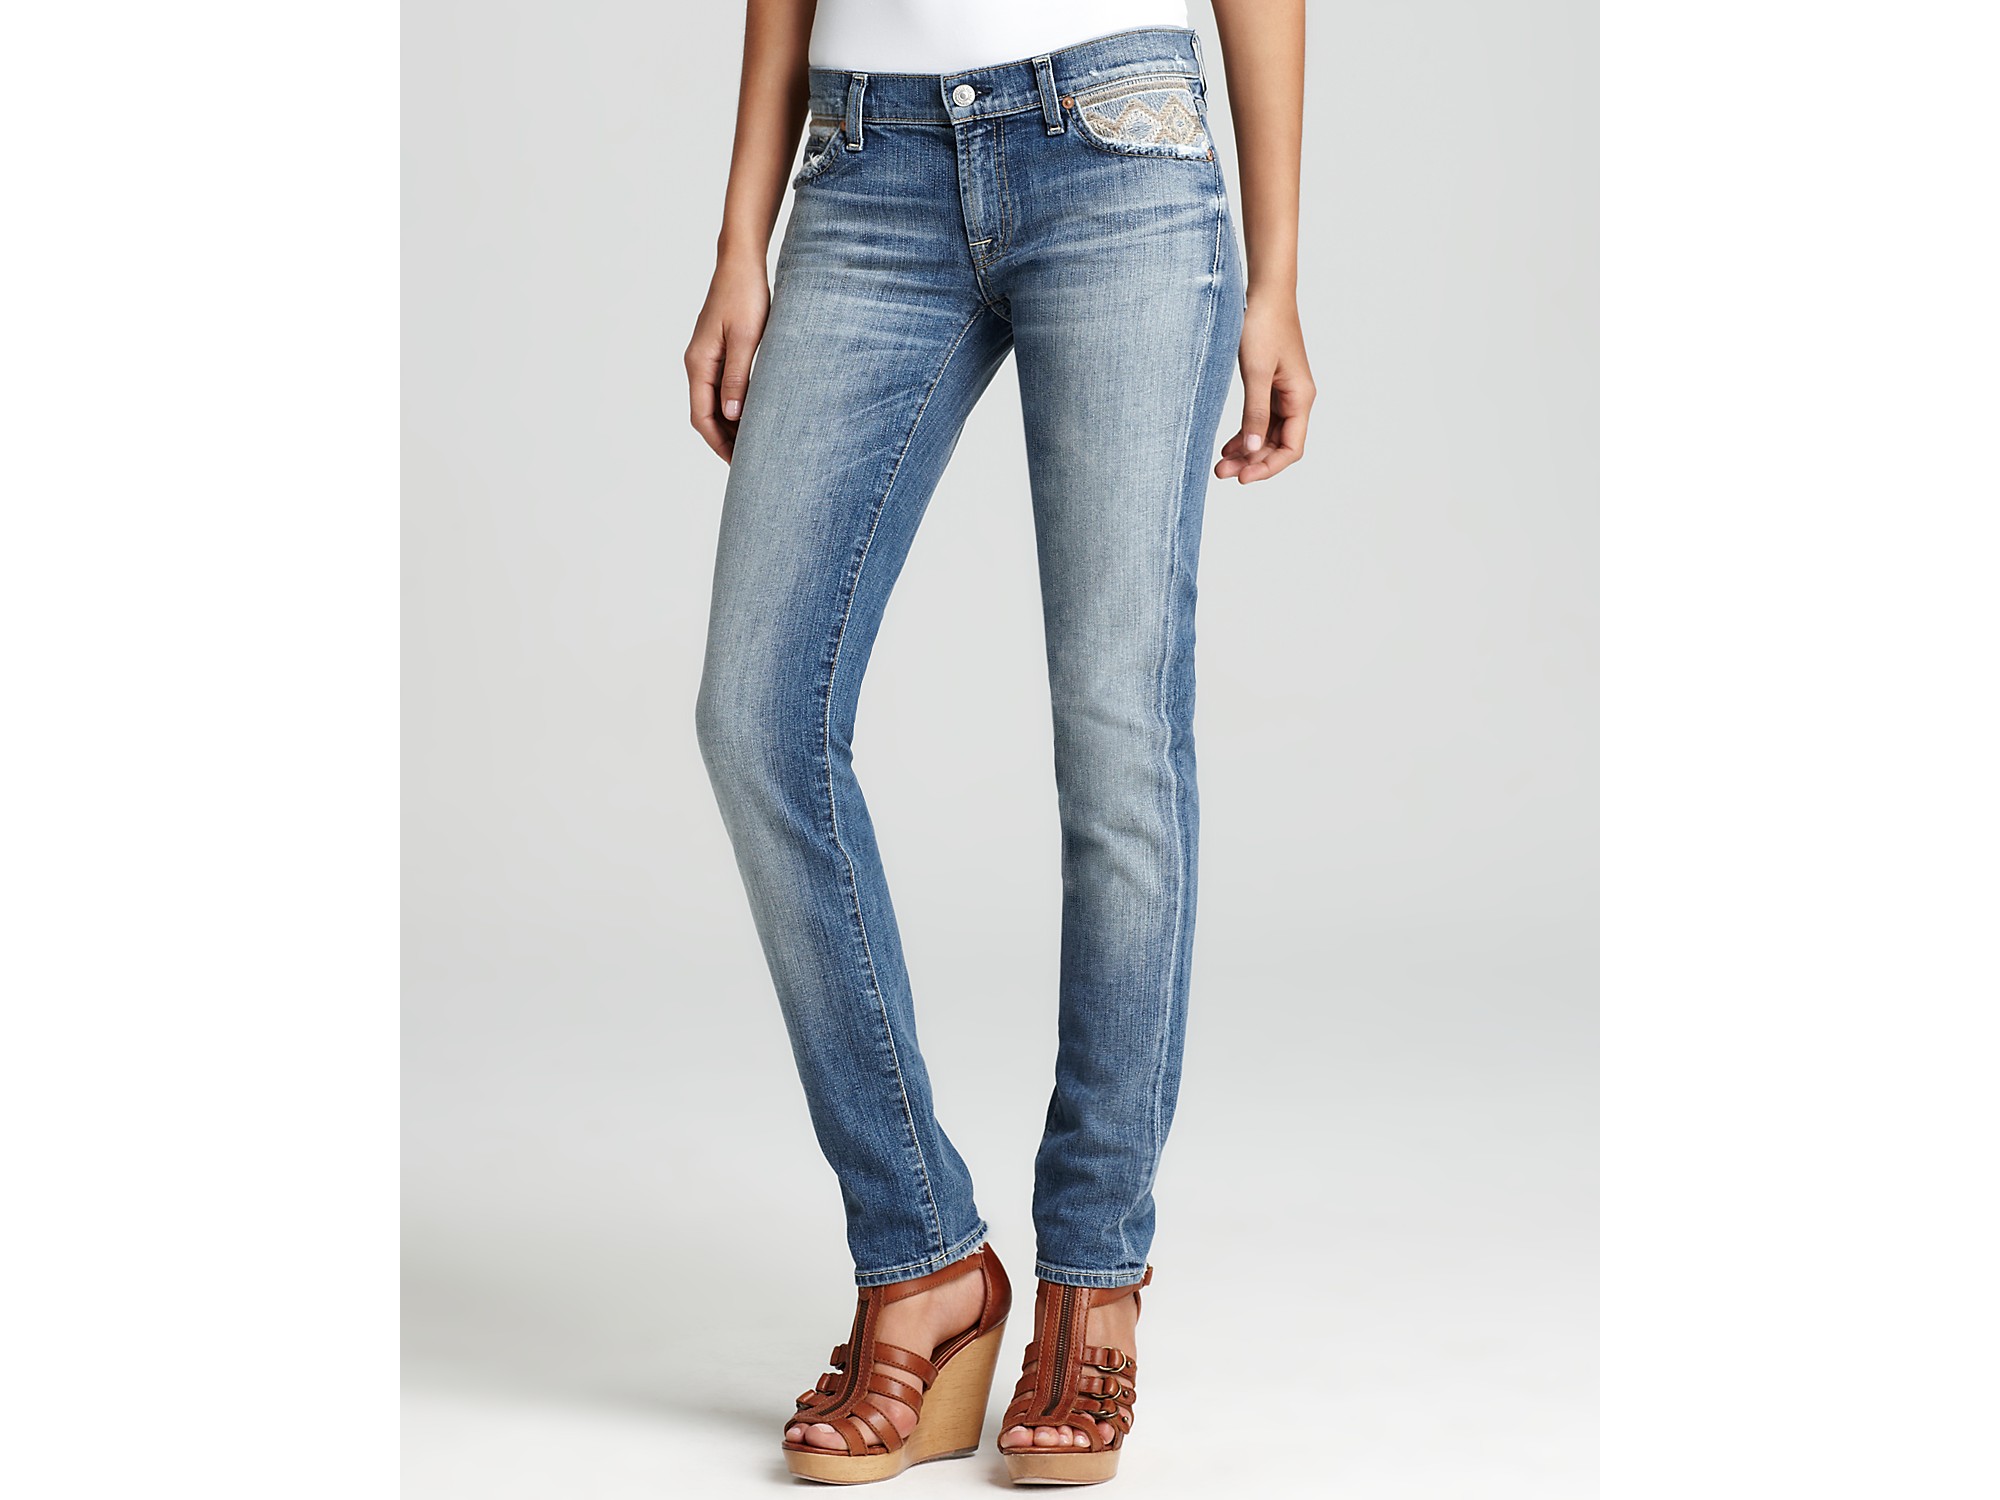 7 for all mankind roxanne classic skinny